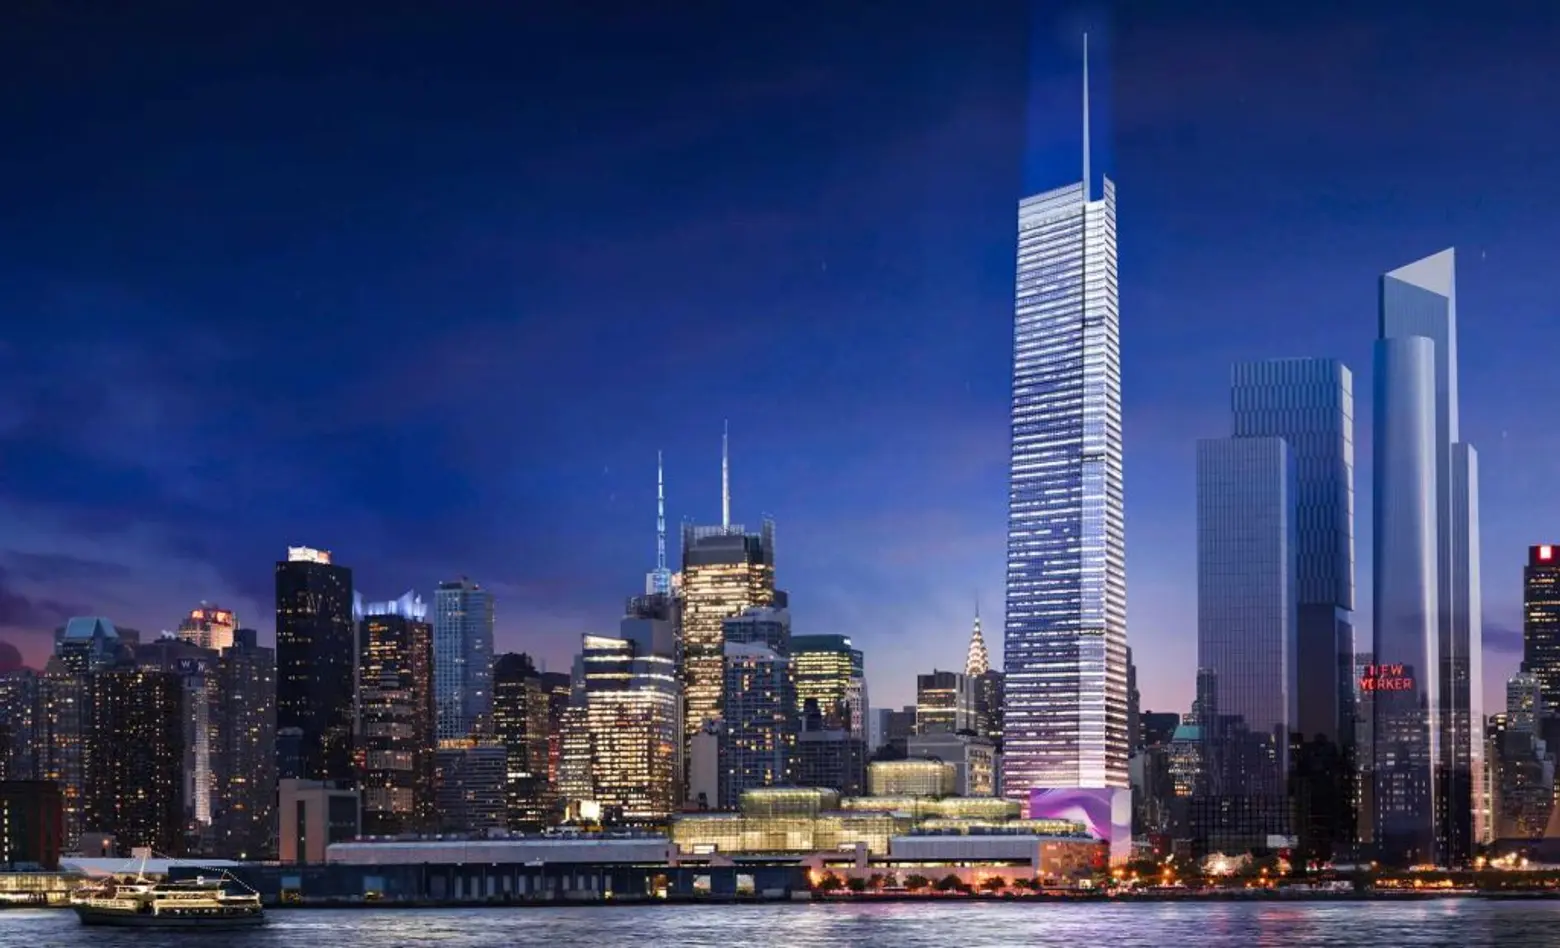 Updated view of 3 Hudson Boulevard adds 300-foot spire, making it tallest in Hudson Yards